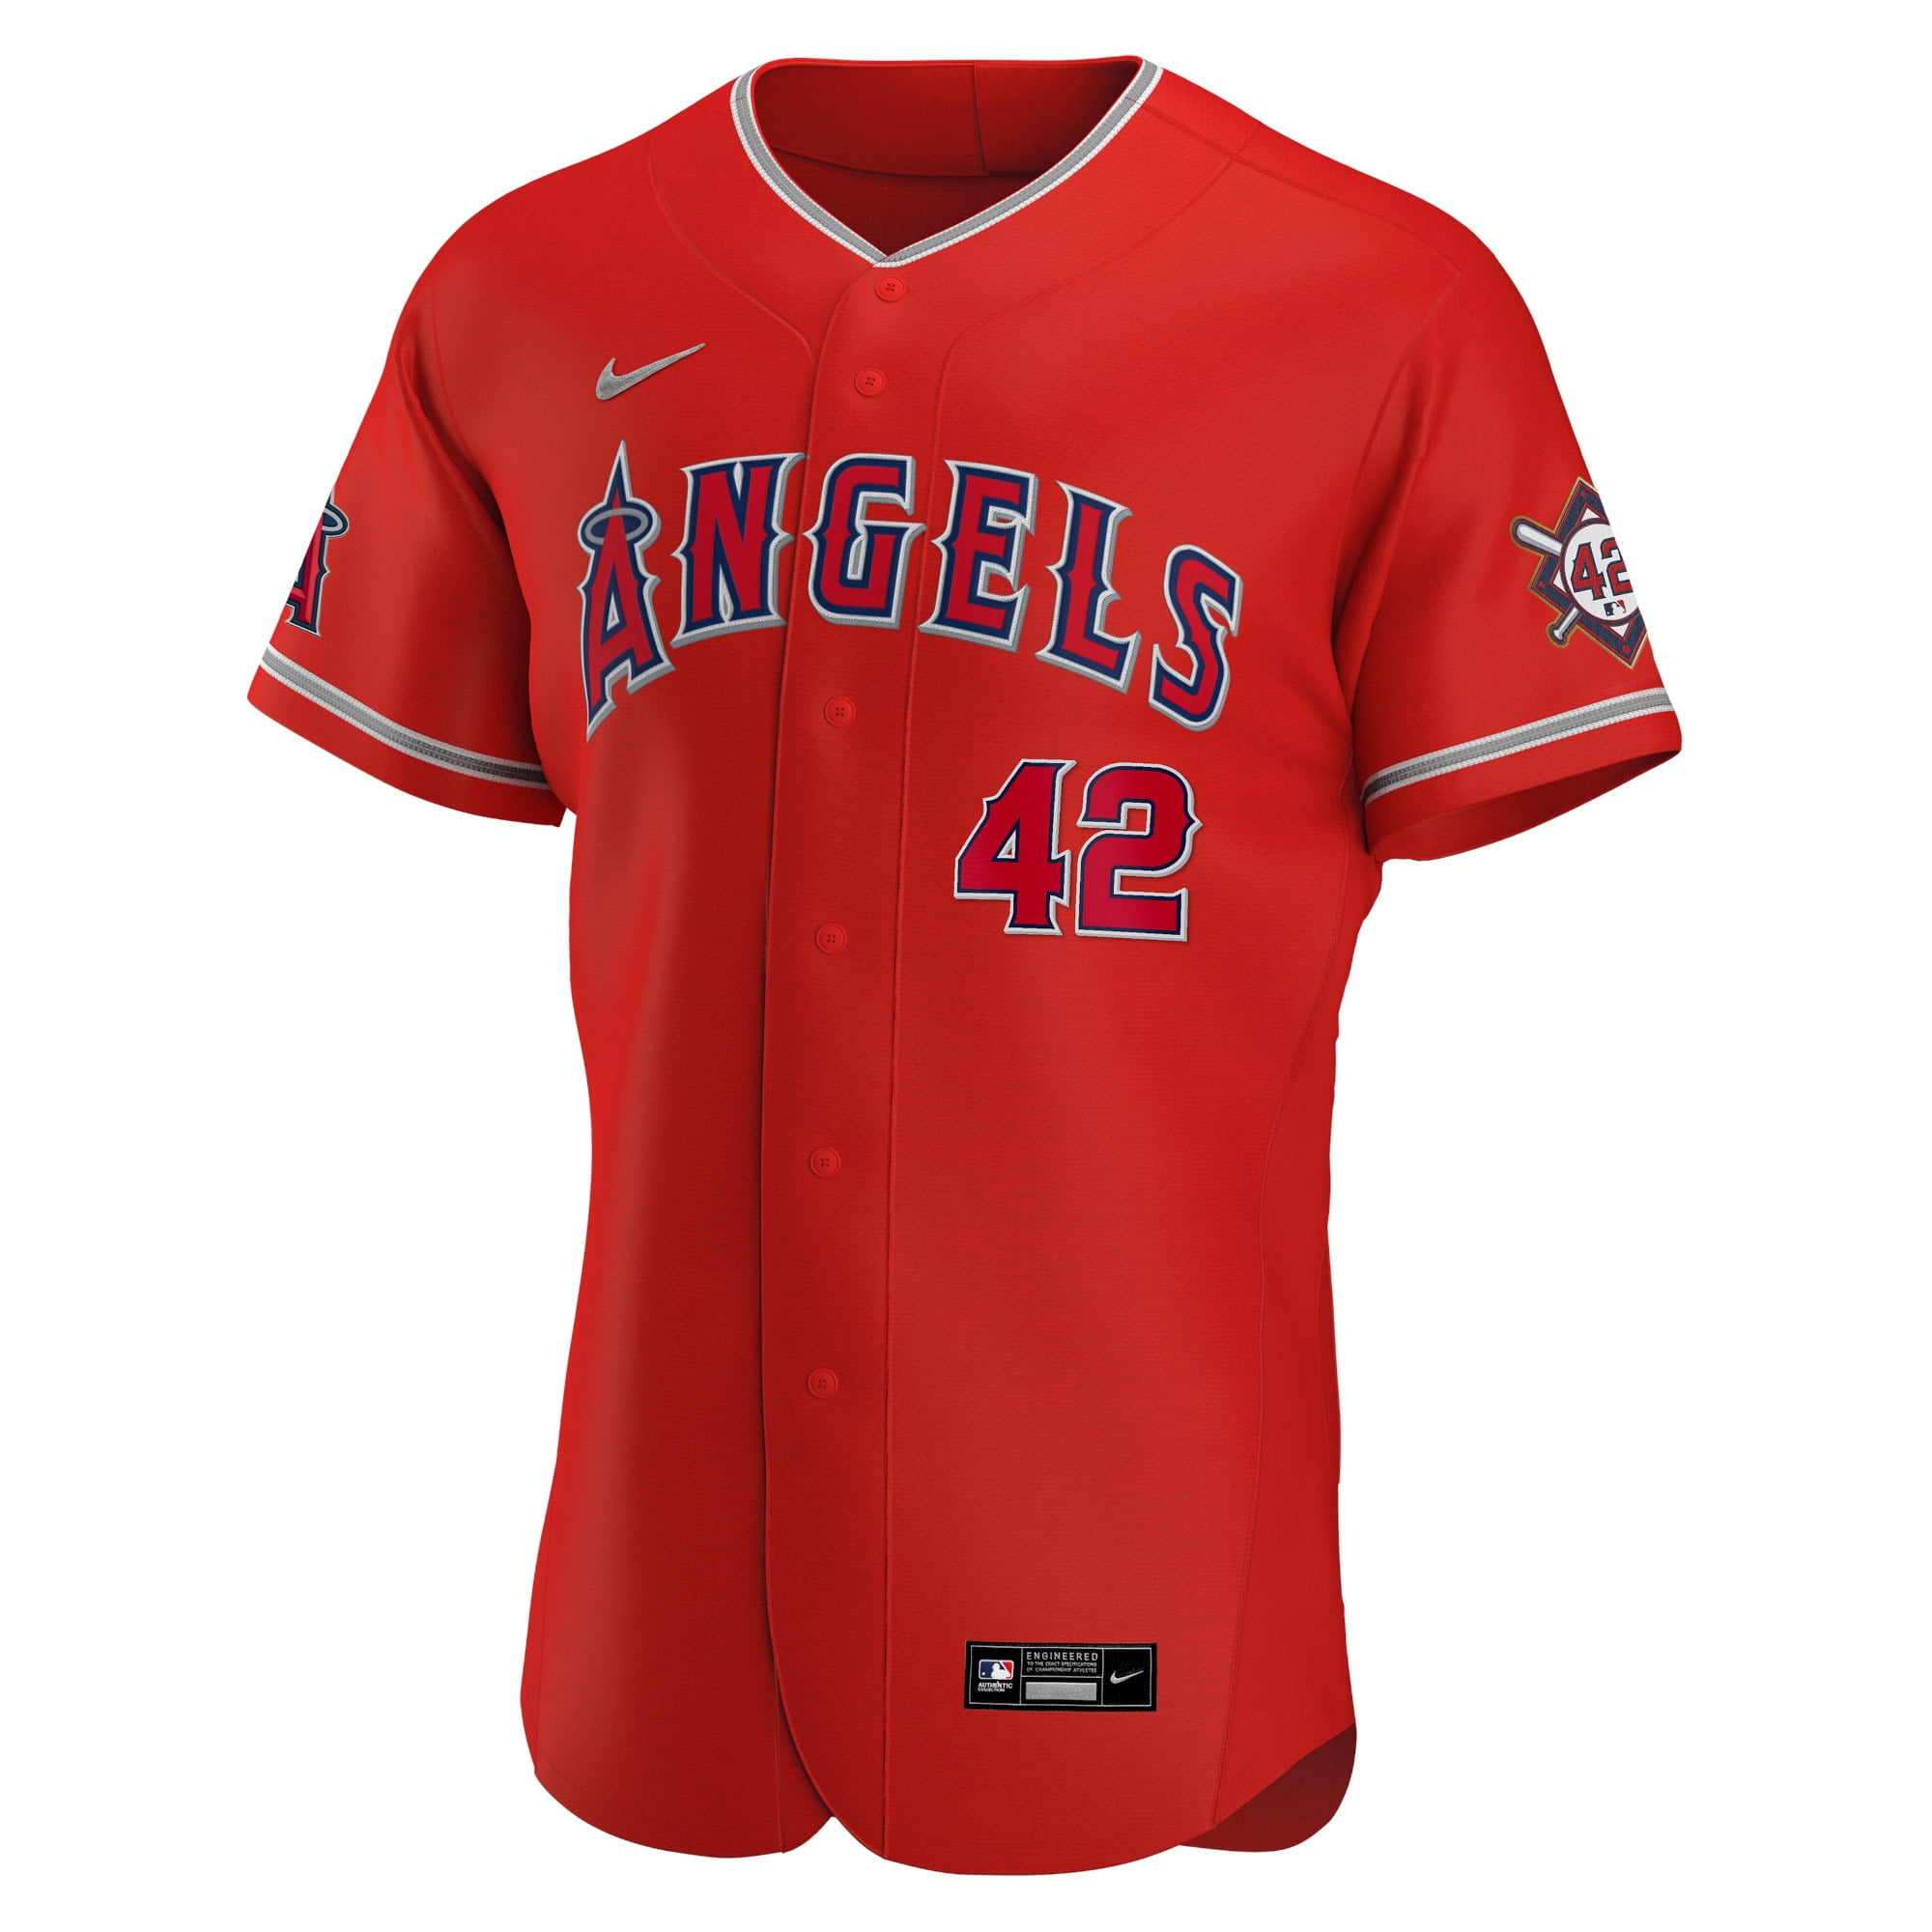 Angels or Dodgers Jersey Color Changing cup